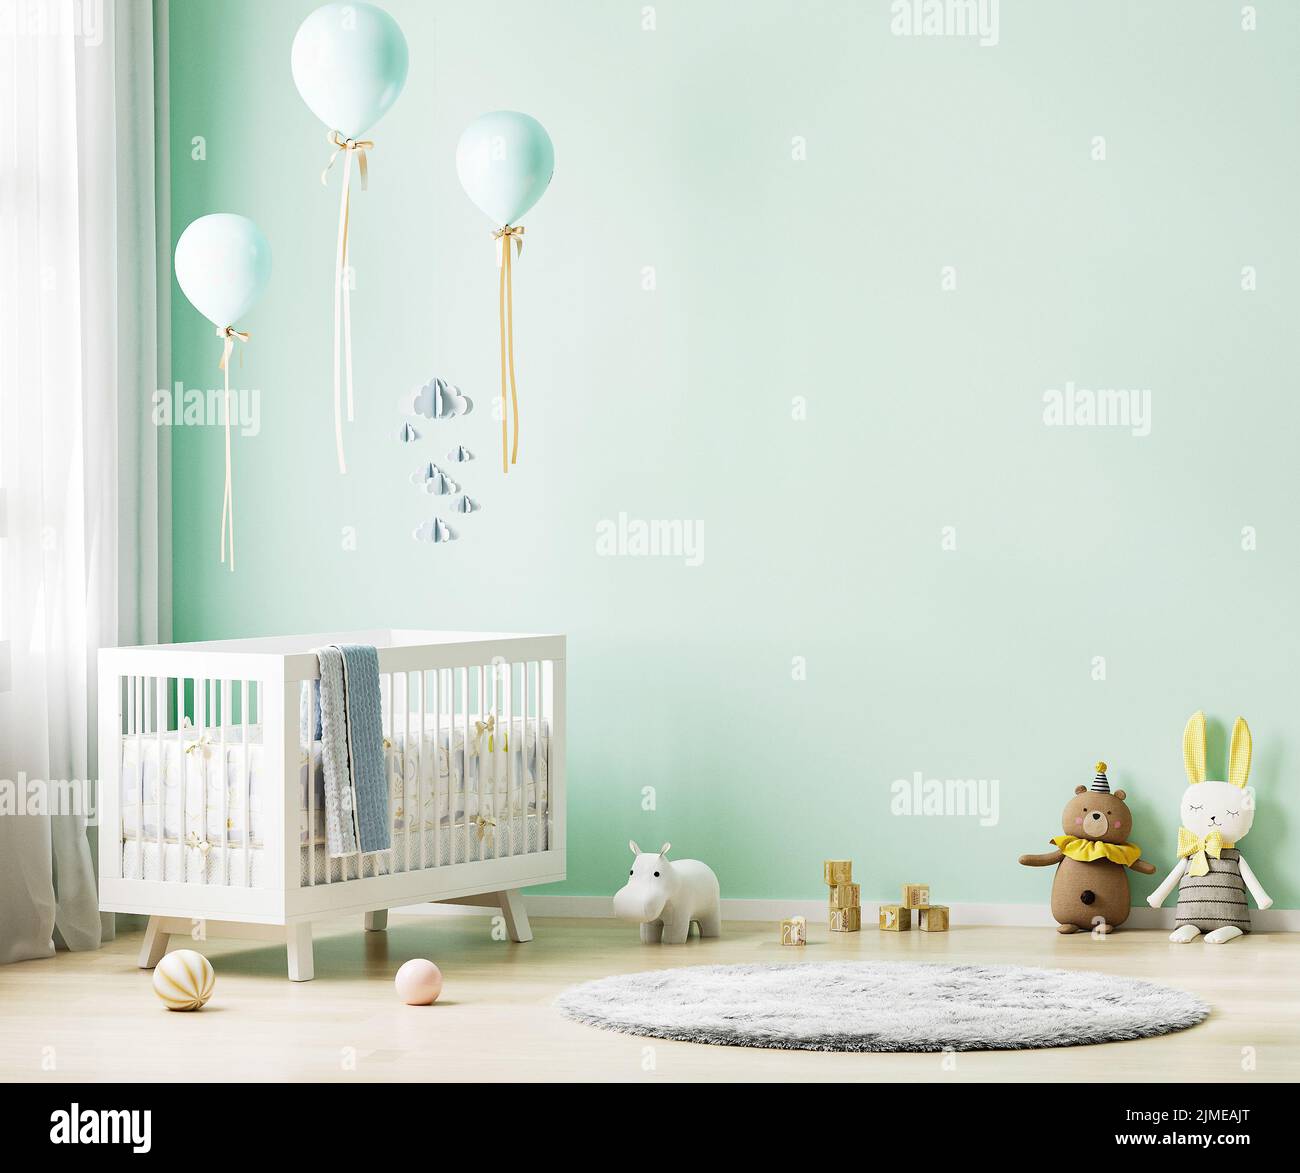 Green nursery room interior background with baby bedding, toys, balloons, nursery mock up, kids room interior, 3d rendering Stock Photo